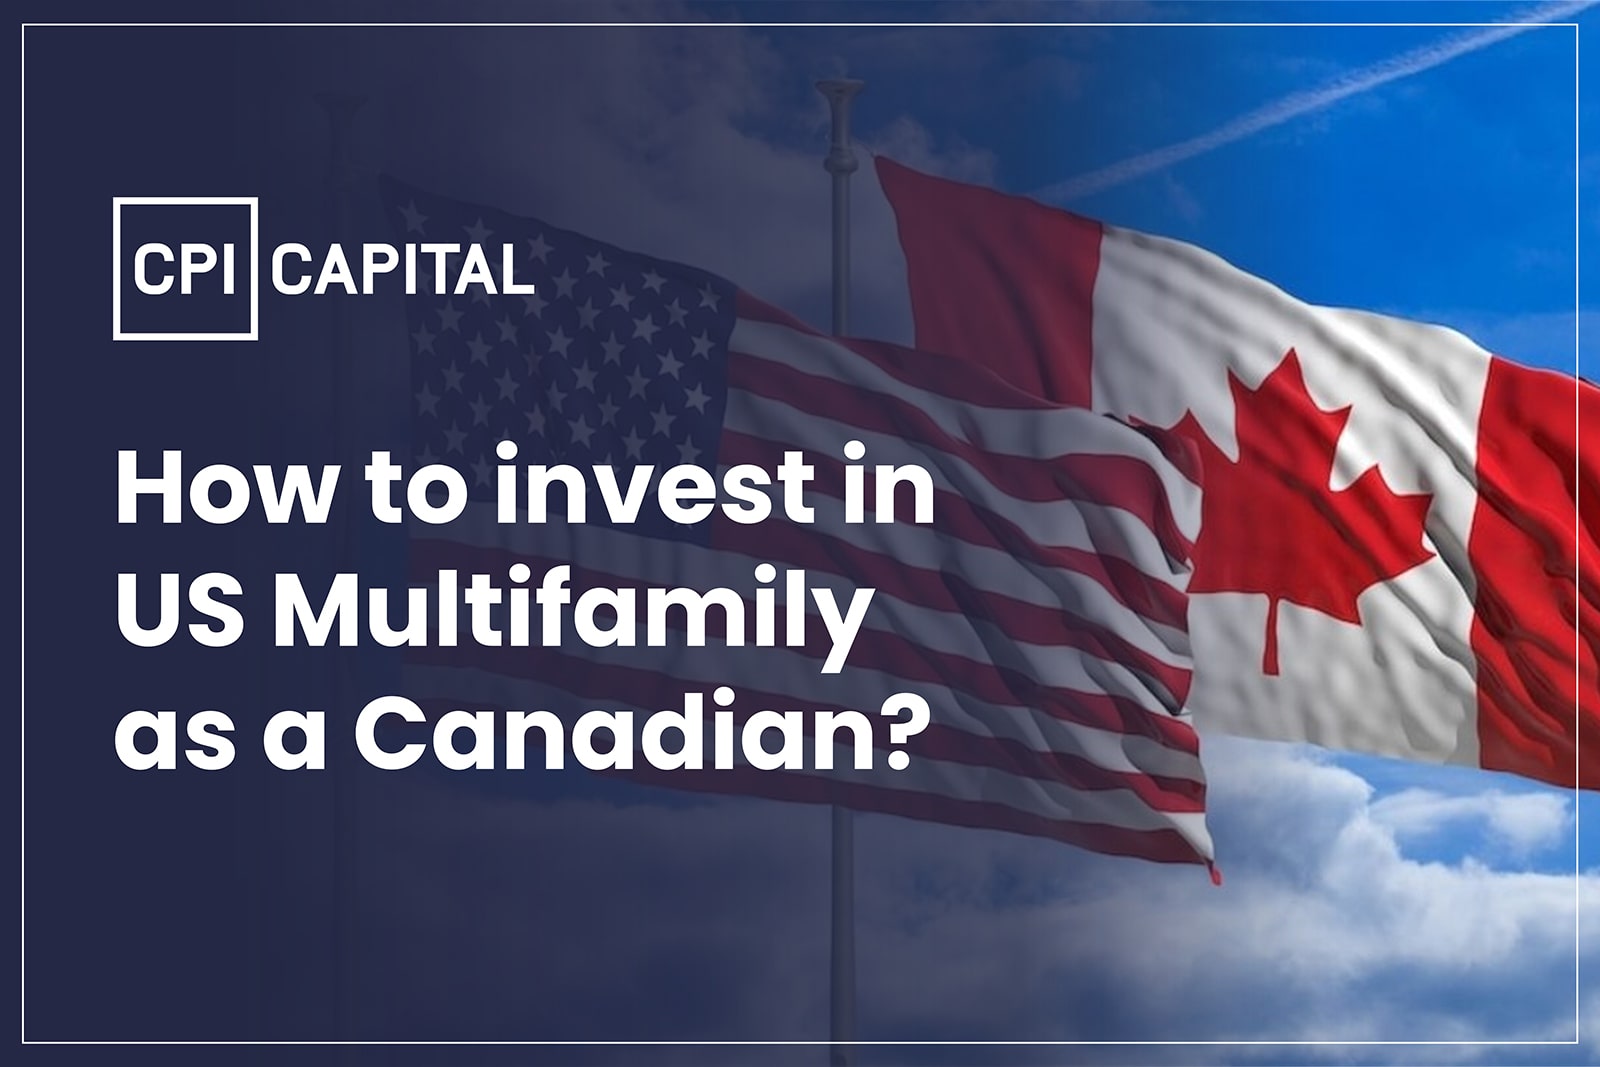 How to invest in US Multifamily Syndicated Properties as a Canadian?